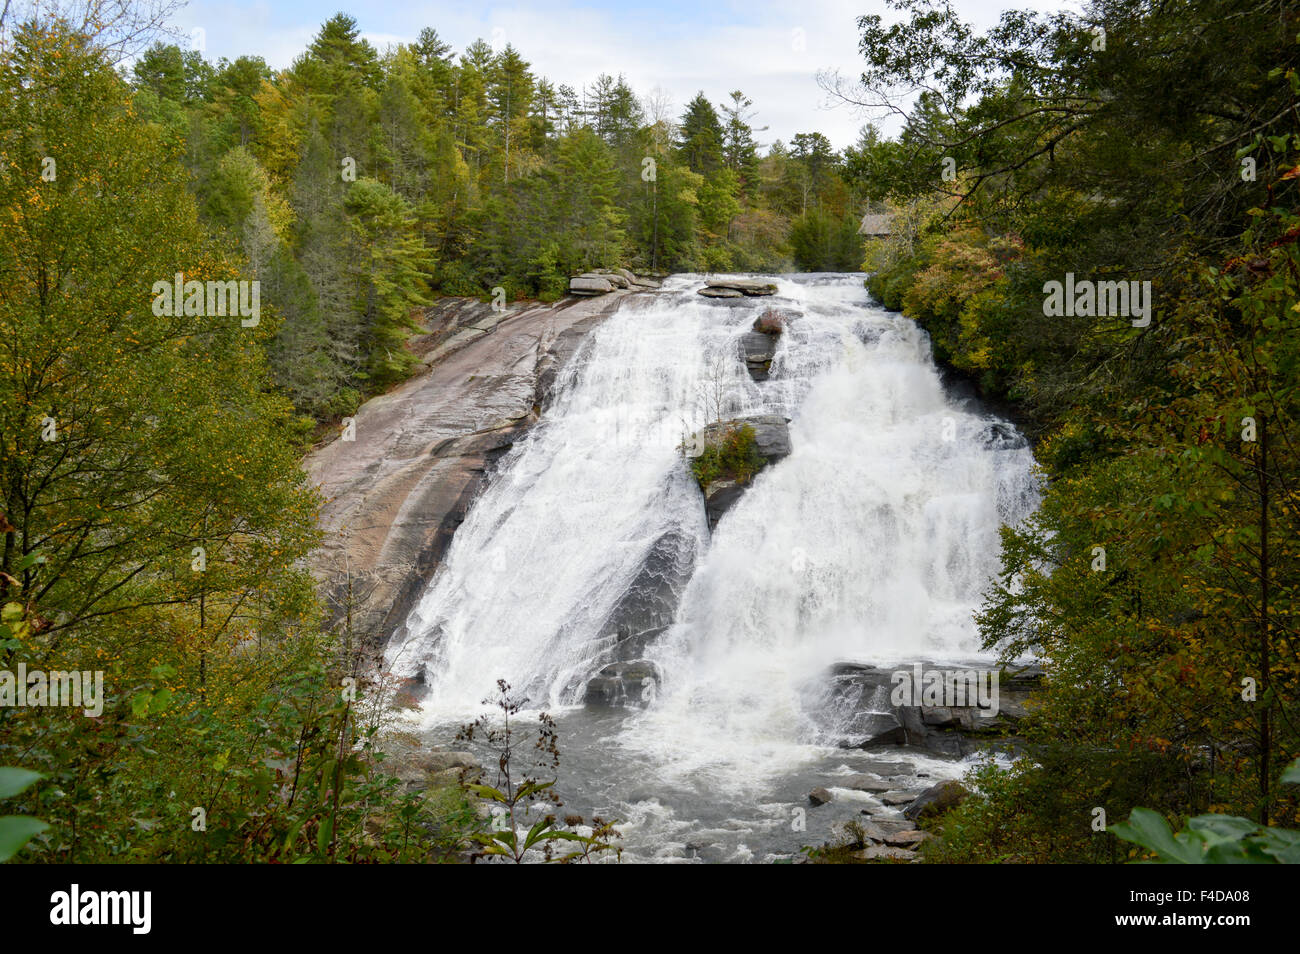 This is the High Falls located in the Dupont State Forest, near Brevard, North Carolina. Stock Photo